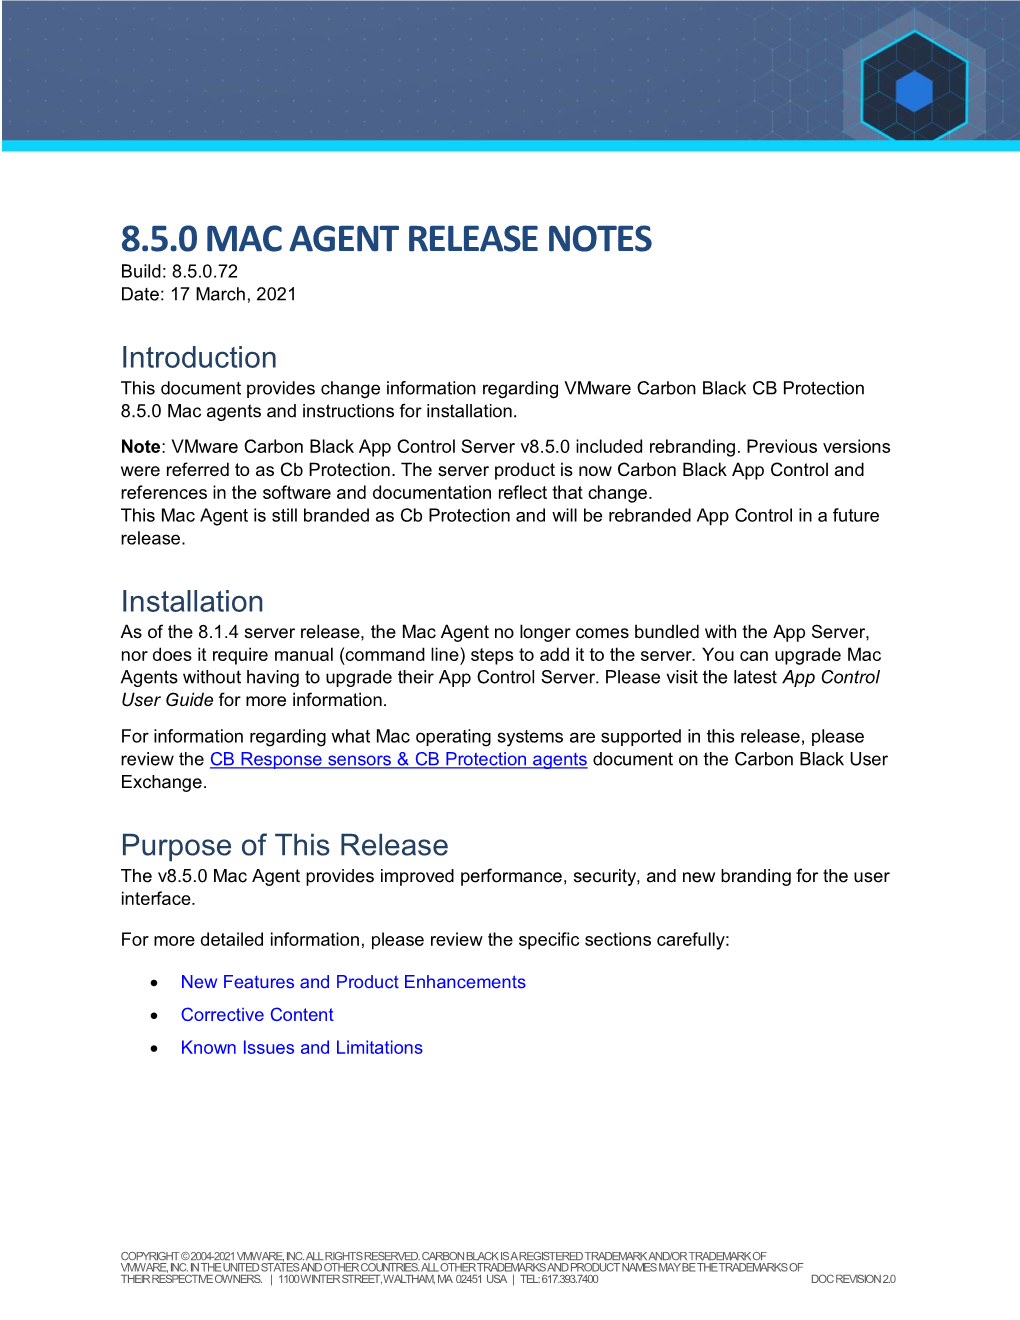 8.5.0 MAC AGENT RELEASE NOTES Build: 8.5.0.72 Date: 17 March, 2021